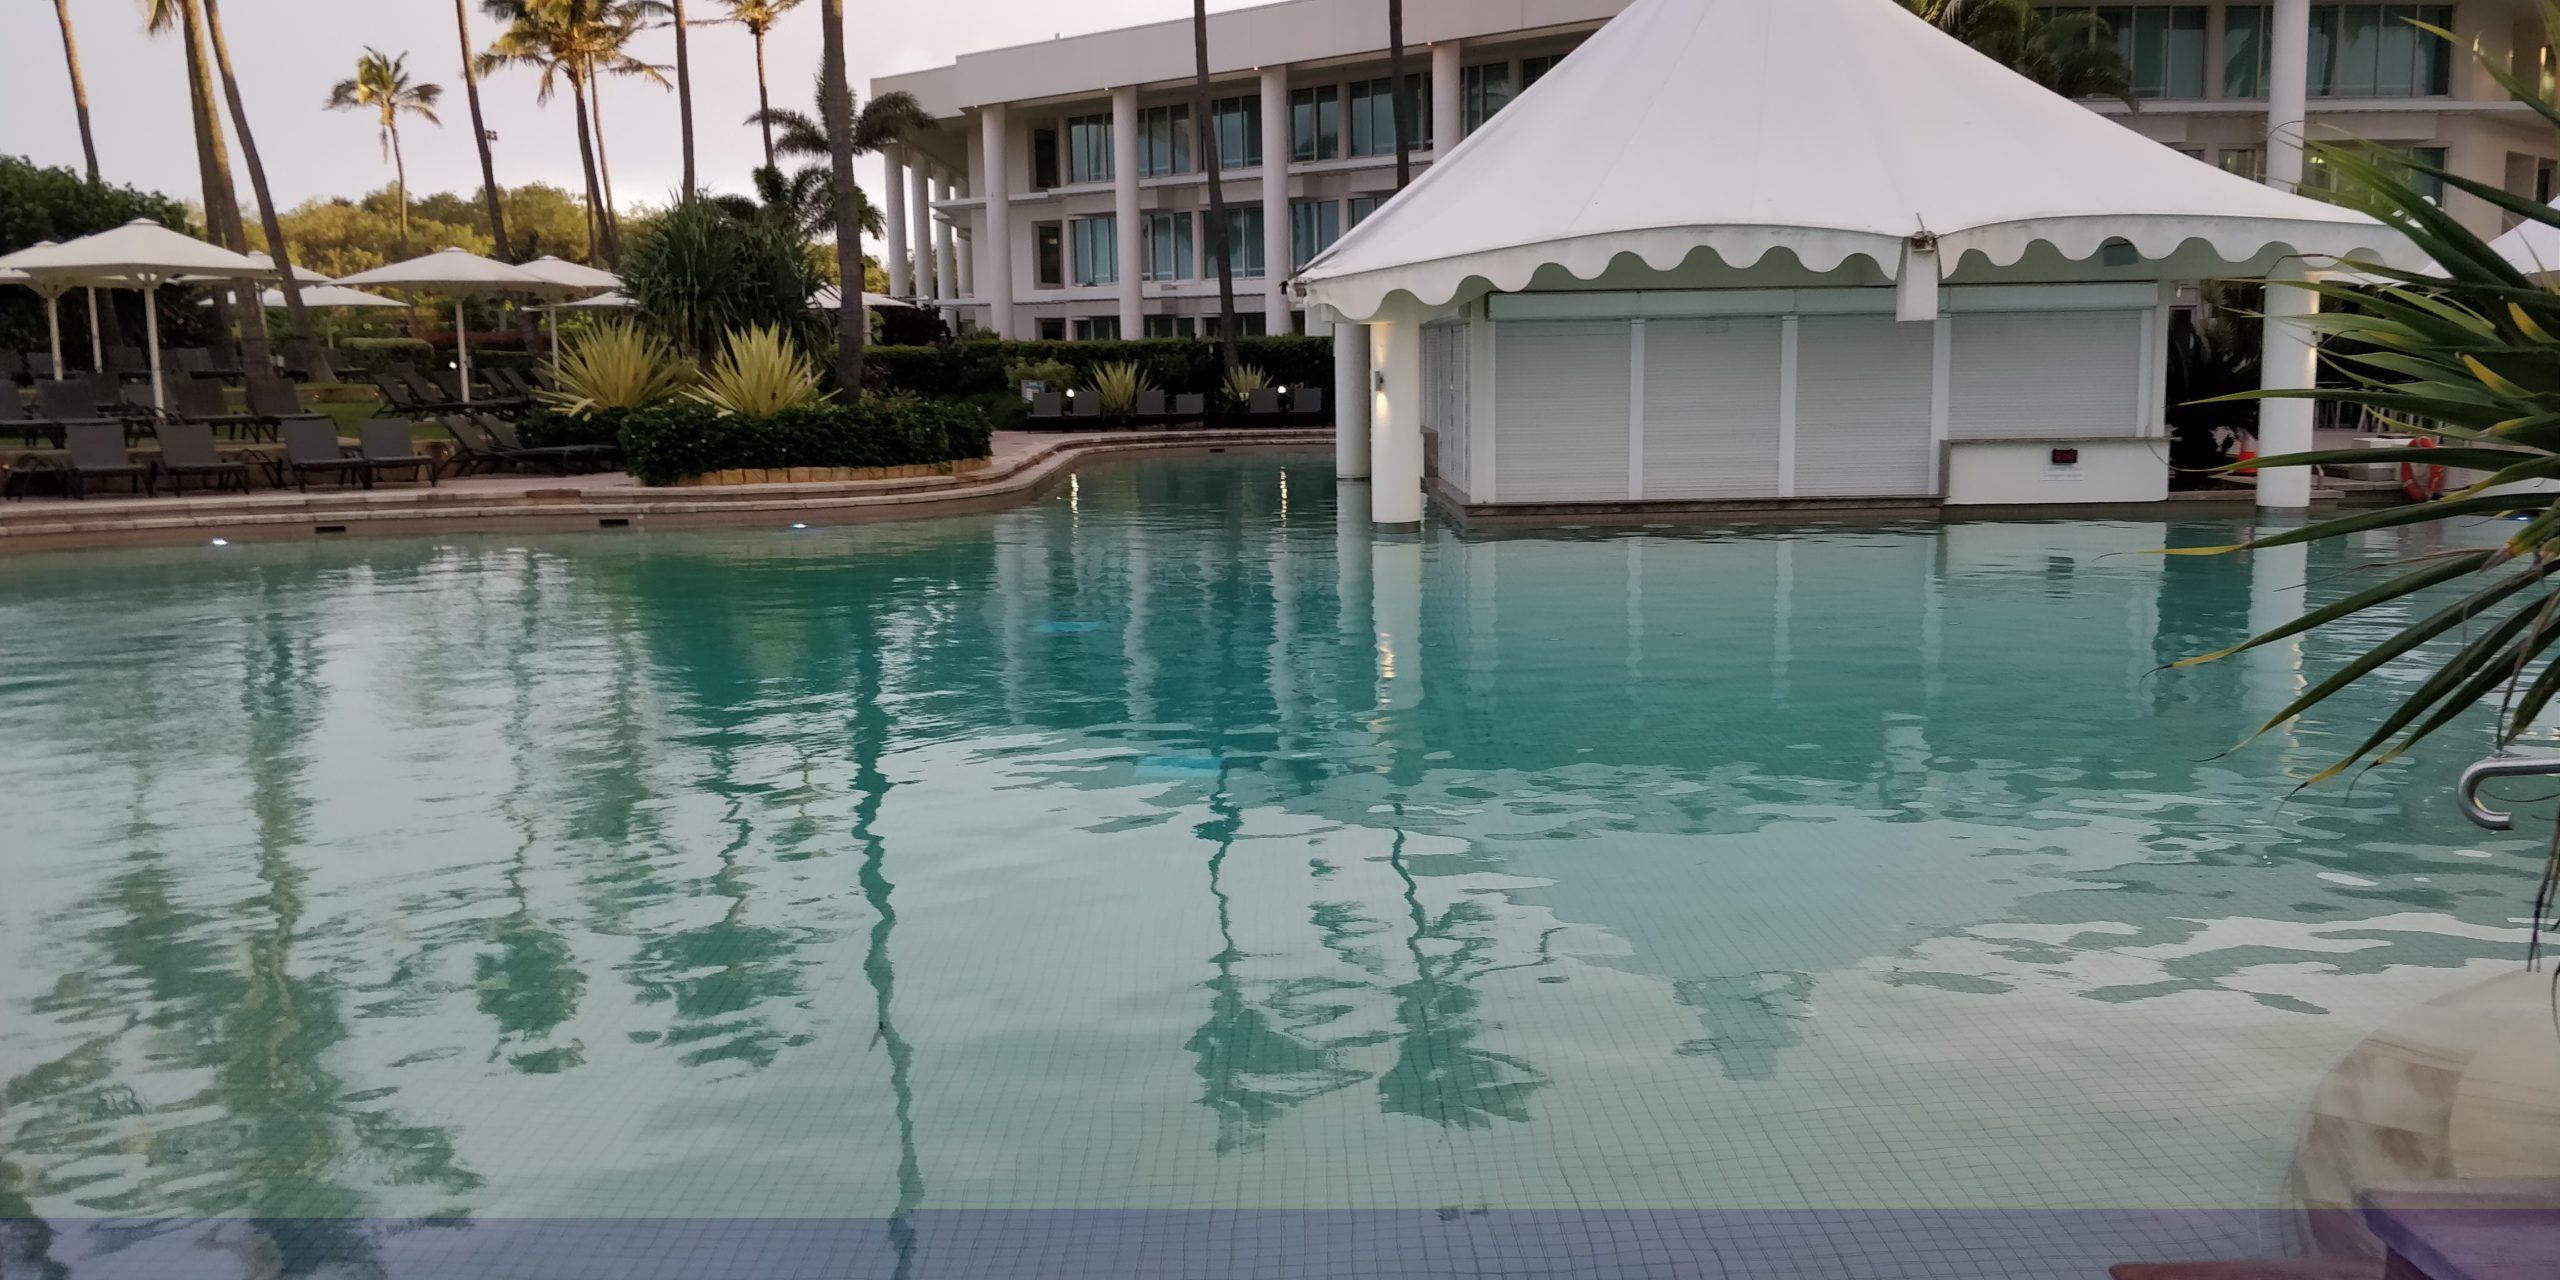 Review the Grand Mirage Resort picture of the swim up bar in the Oasis pool